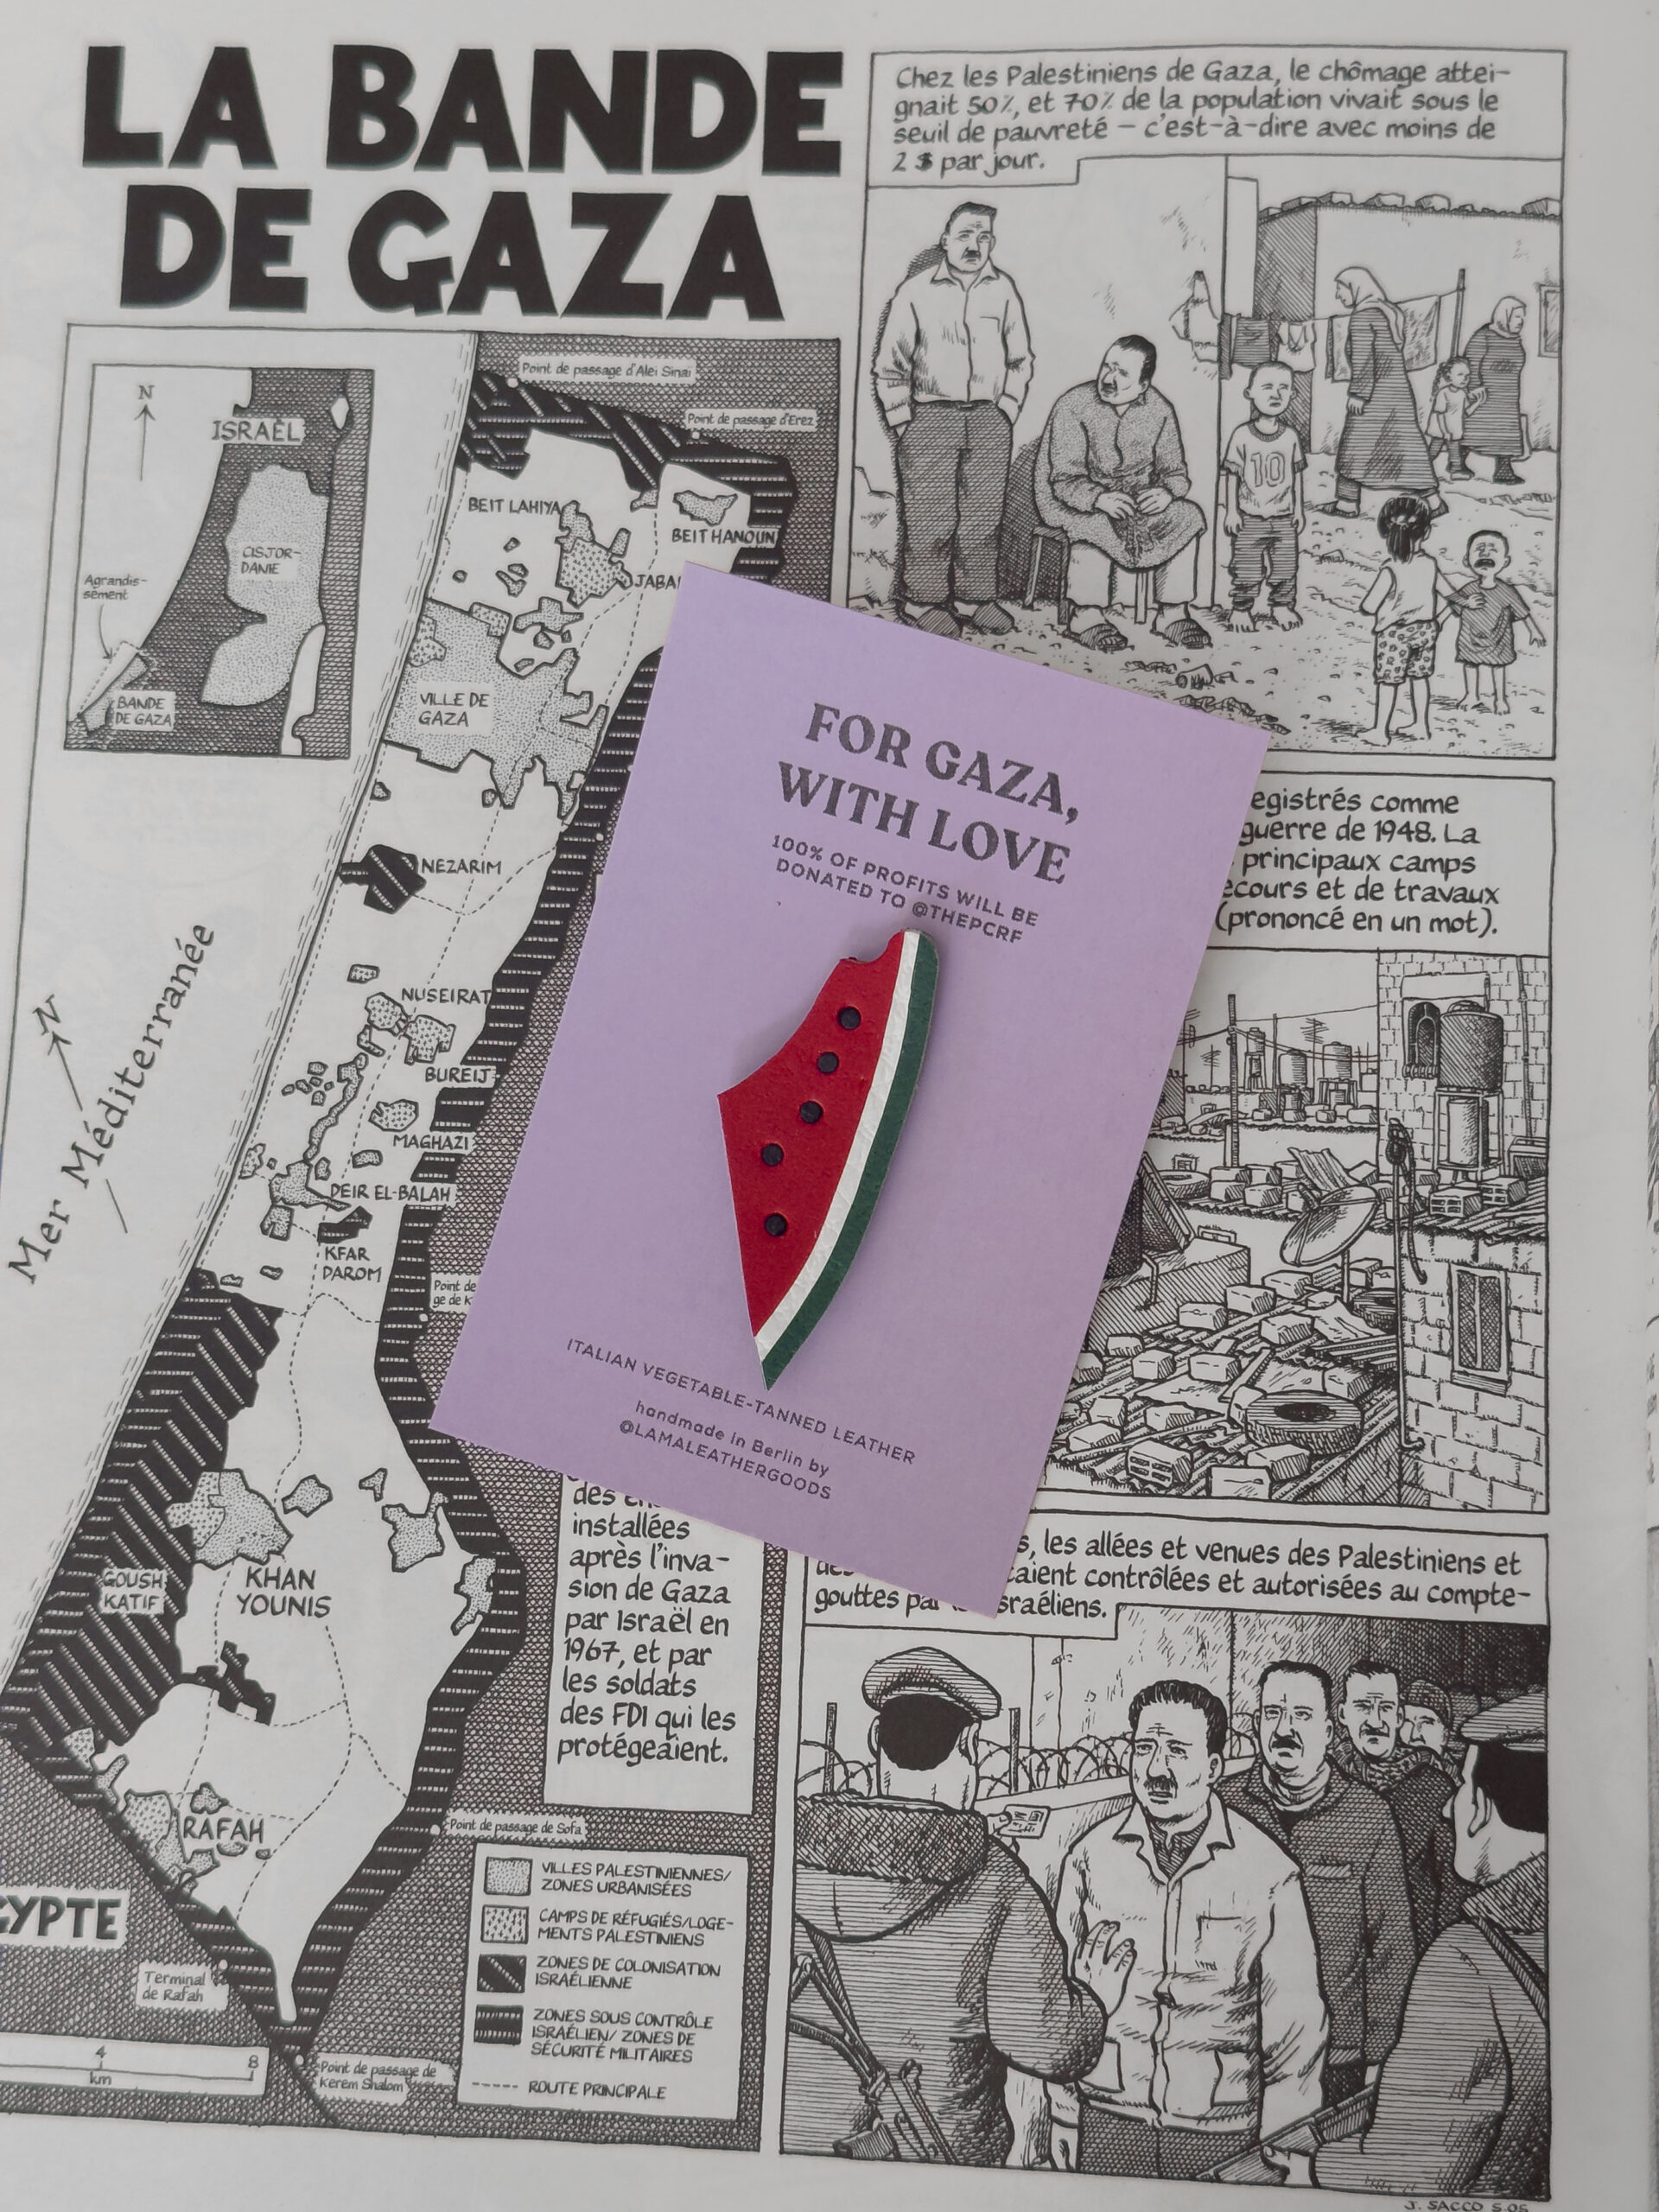 For Gaza With Love Brooch - 100% profits donated!